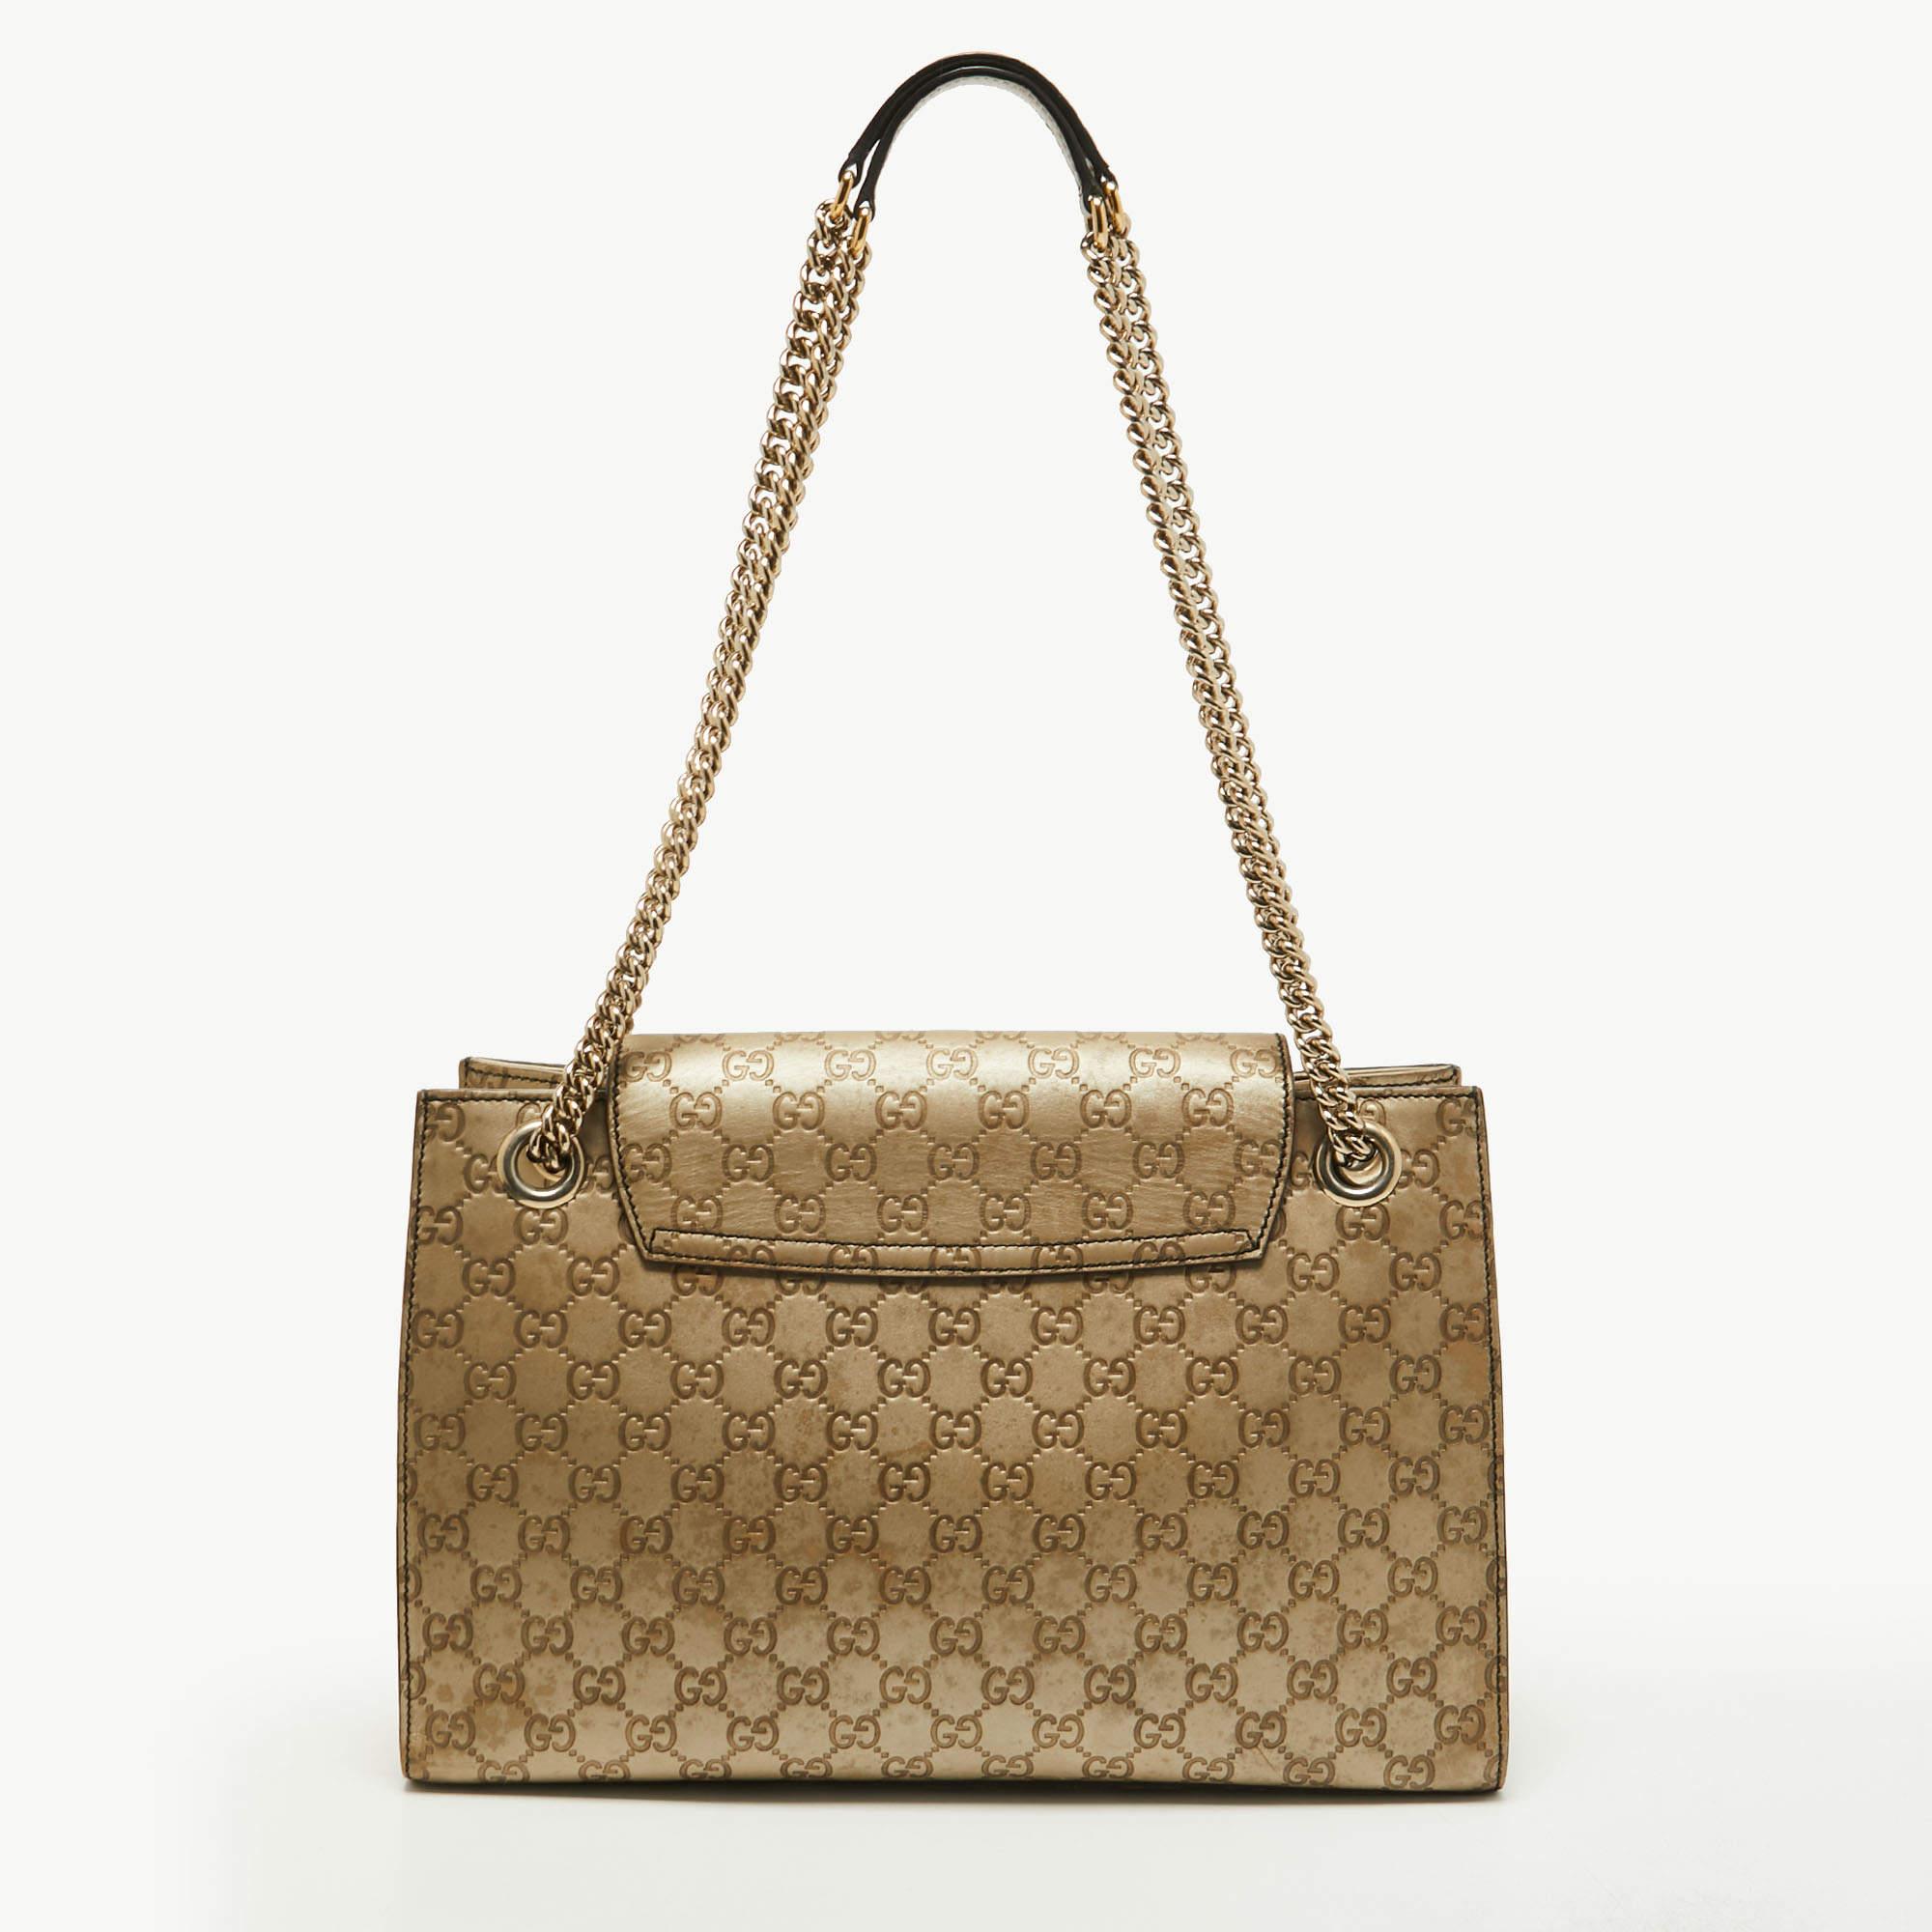 Gucci's handbags are not only well-crafted, but they are also coveted because of their high appeal. This Emily Chain shoulder bag, like all of Gucci's creations, is fabulous and closet-worthy. It has been crafted from Guccissima leather and styled